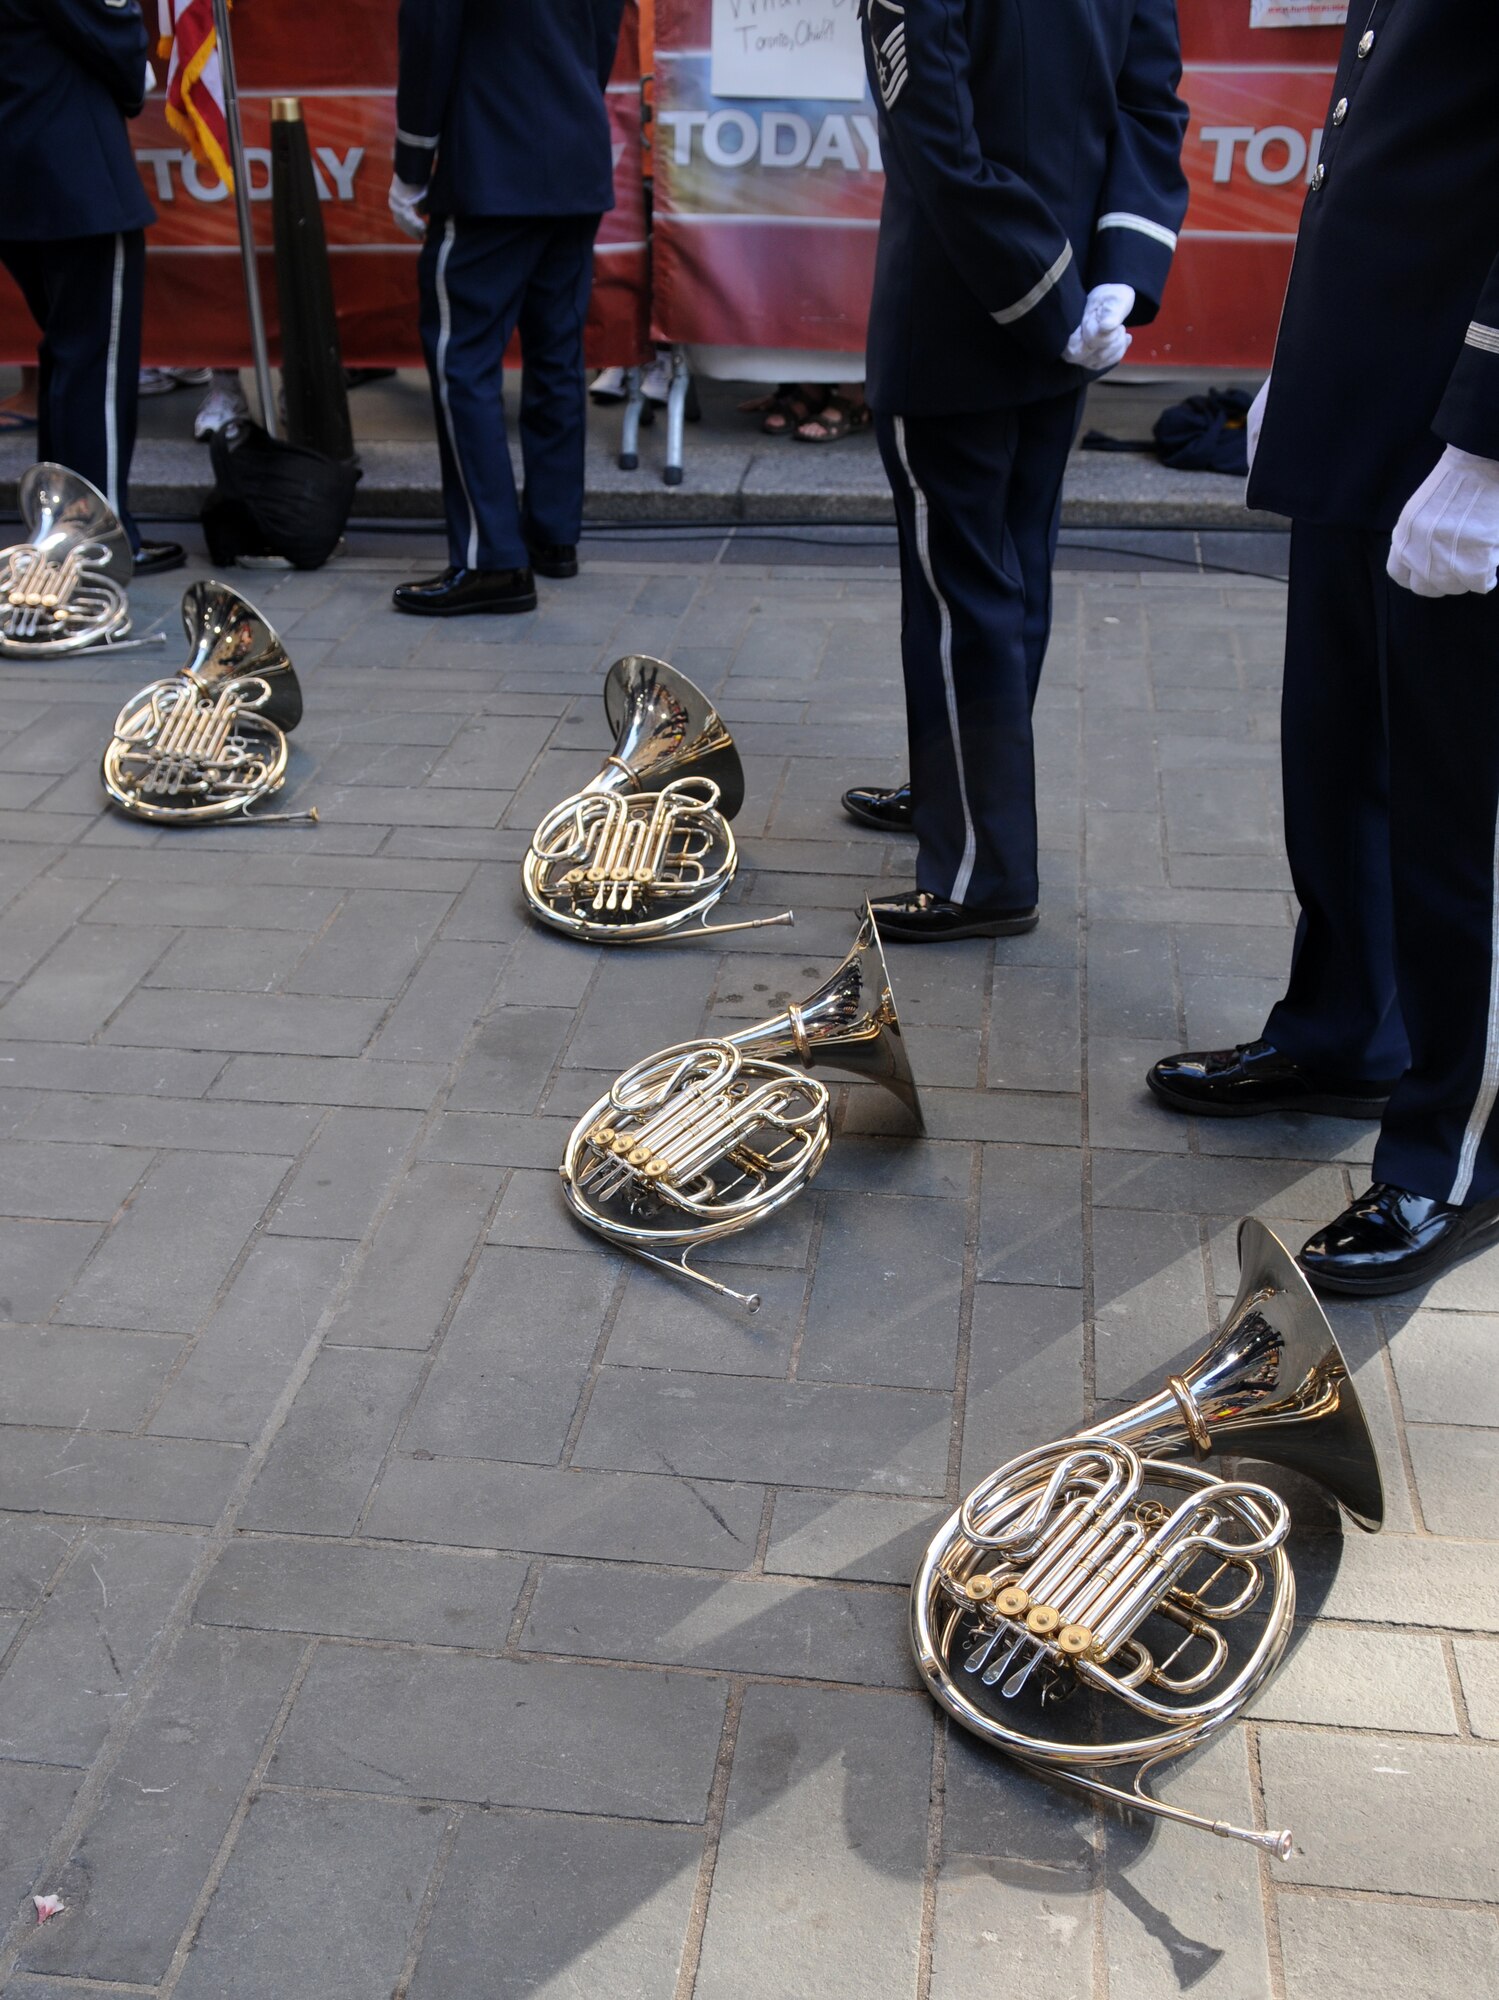 Members of the Ceremonial Brass rest in between takes of the live Independence Day broadcast from Rockefeller Plaza in New York City. The Ceremonial Brass performed patriotic music and marches throughout the telecast, before and after commercial breaks. (U.S. Air Force photo by Senior Airman Marleah Miller)